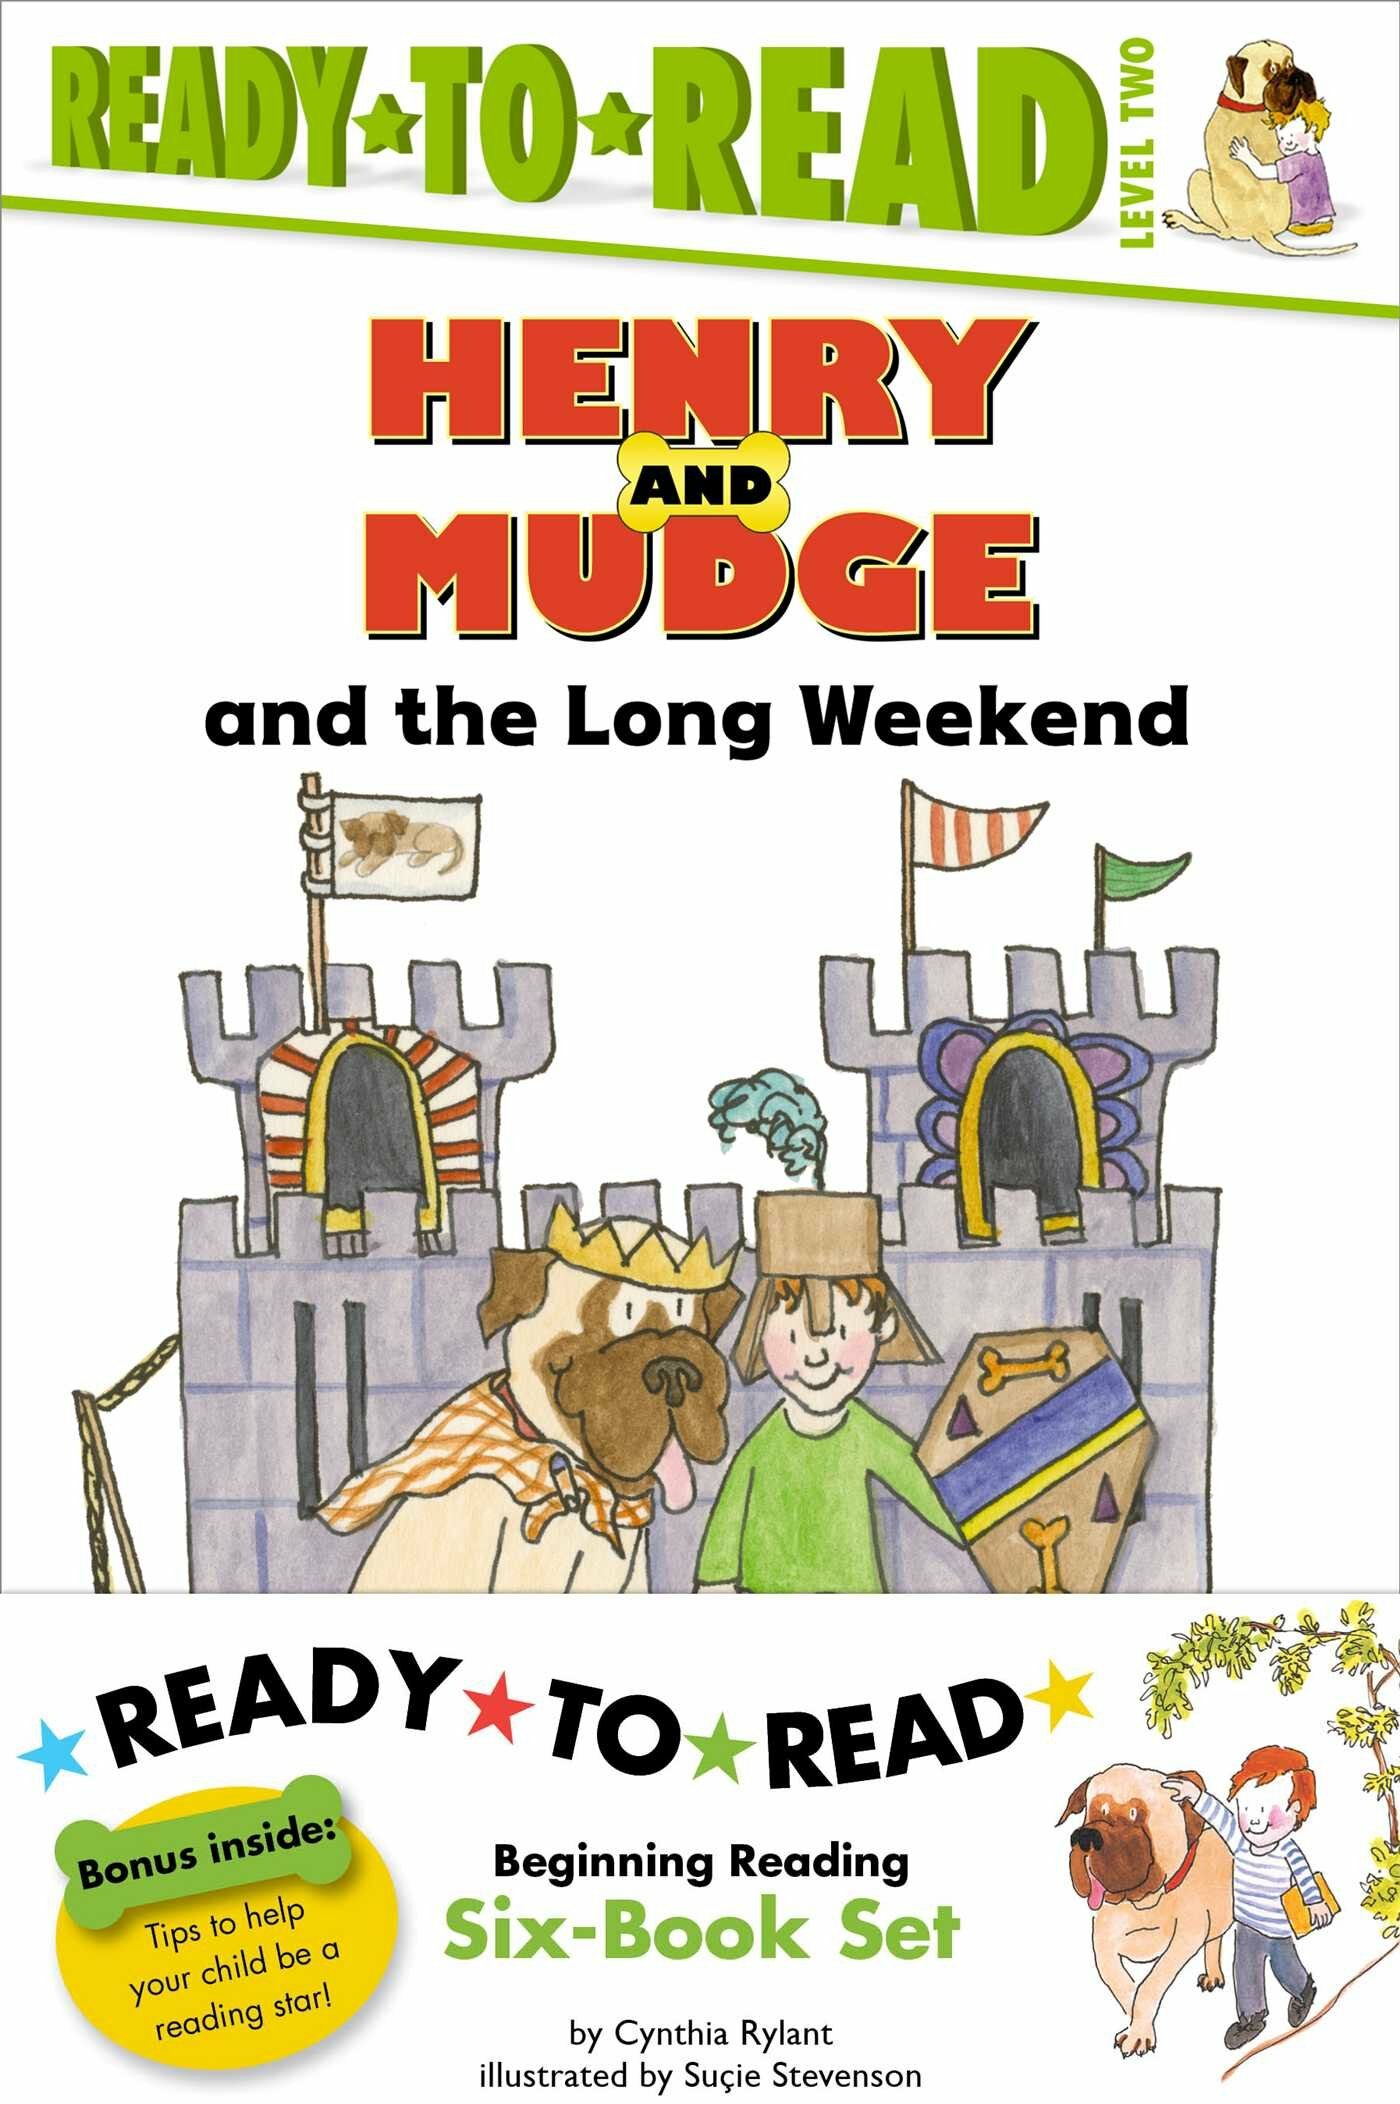 Ready-to-Read 2 : Henry and Mudge Pack #2 (Paperback 6권)